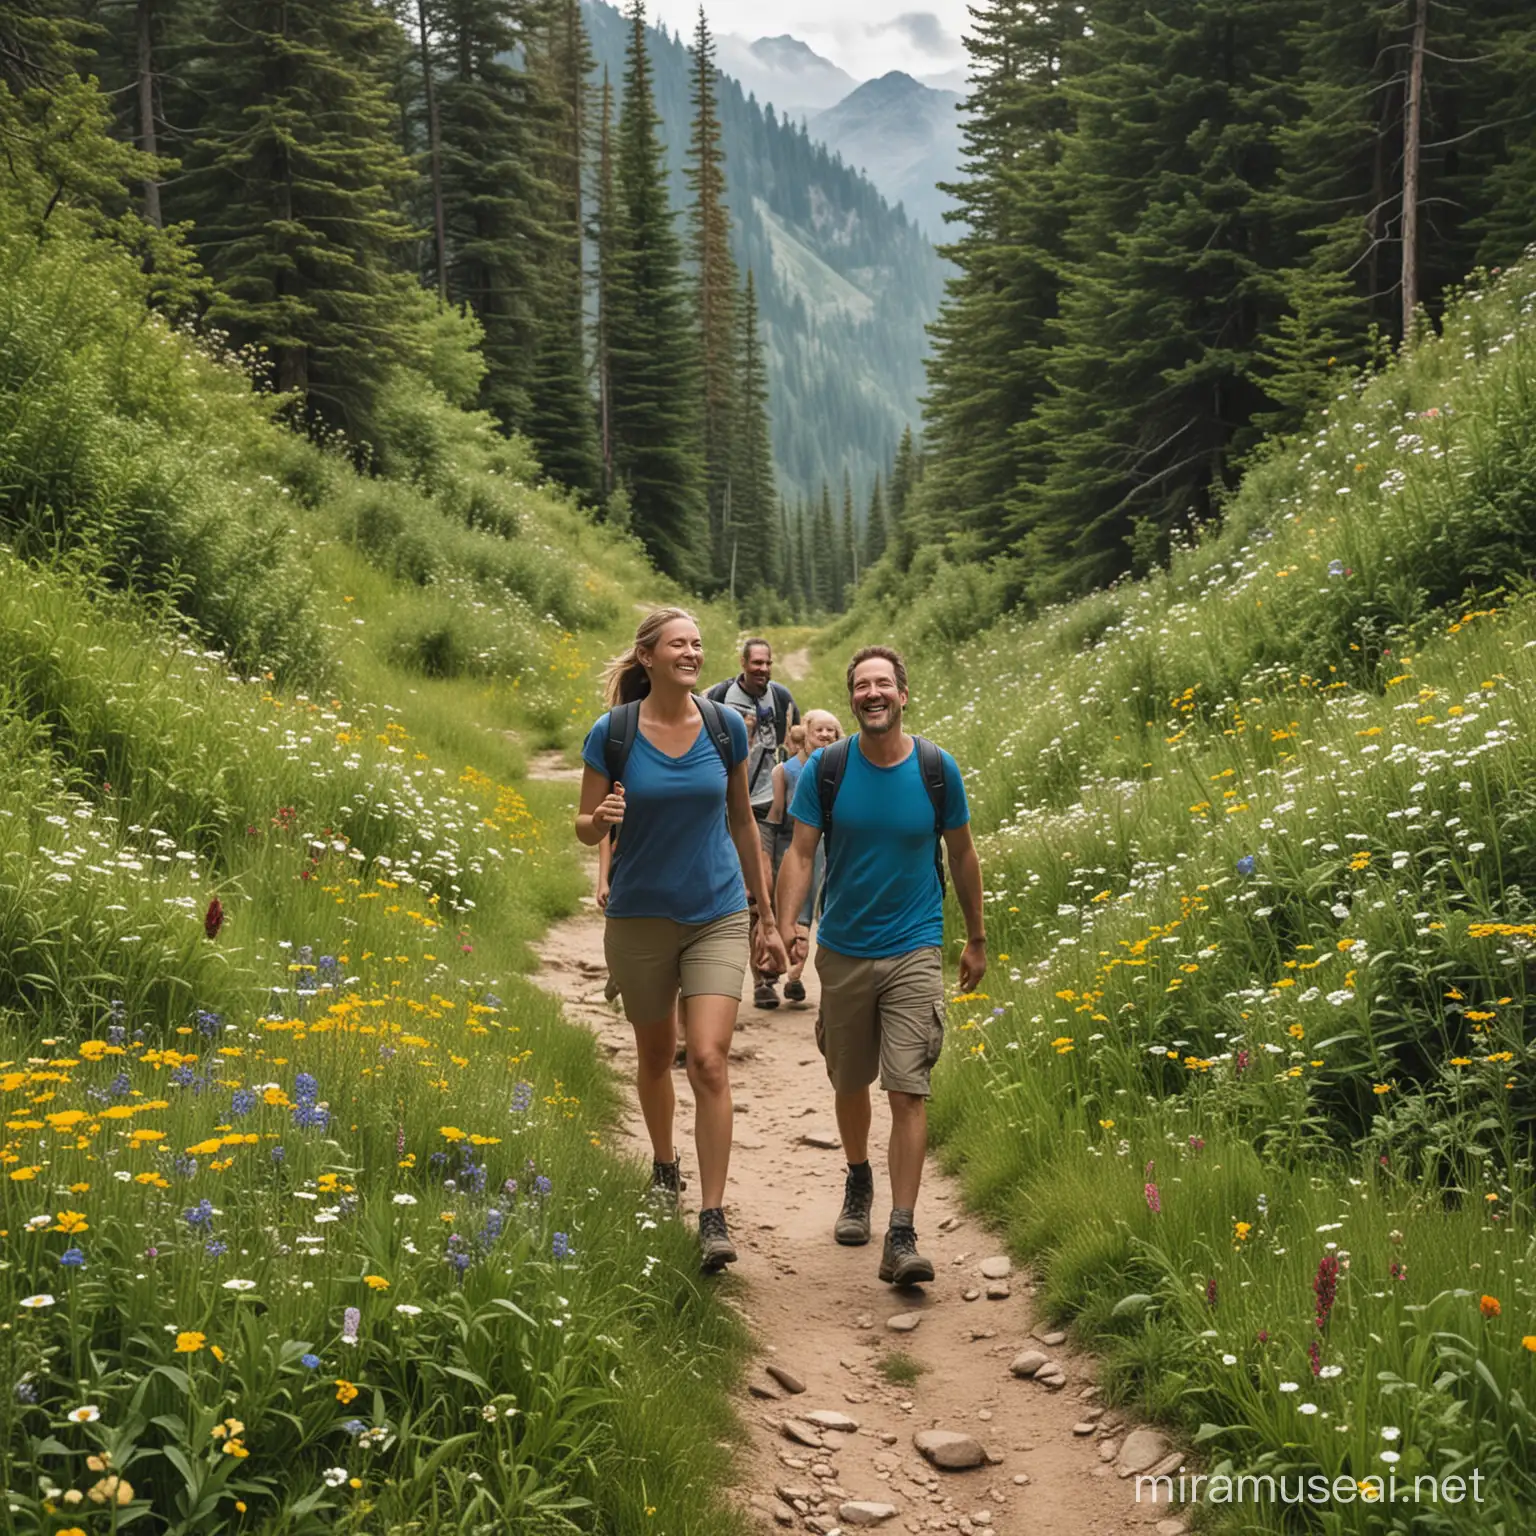 "A father smiles as he leads his family on a scenic hike through the mountains, surrounded by lush greenery and vibrant wildflowers. They laugh and bond while getting their hearts pumping and enjoying the beauty of nature—a perfect blend of exercise and relaxation for a fulfilling weekend."